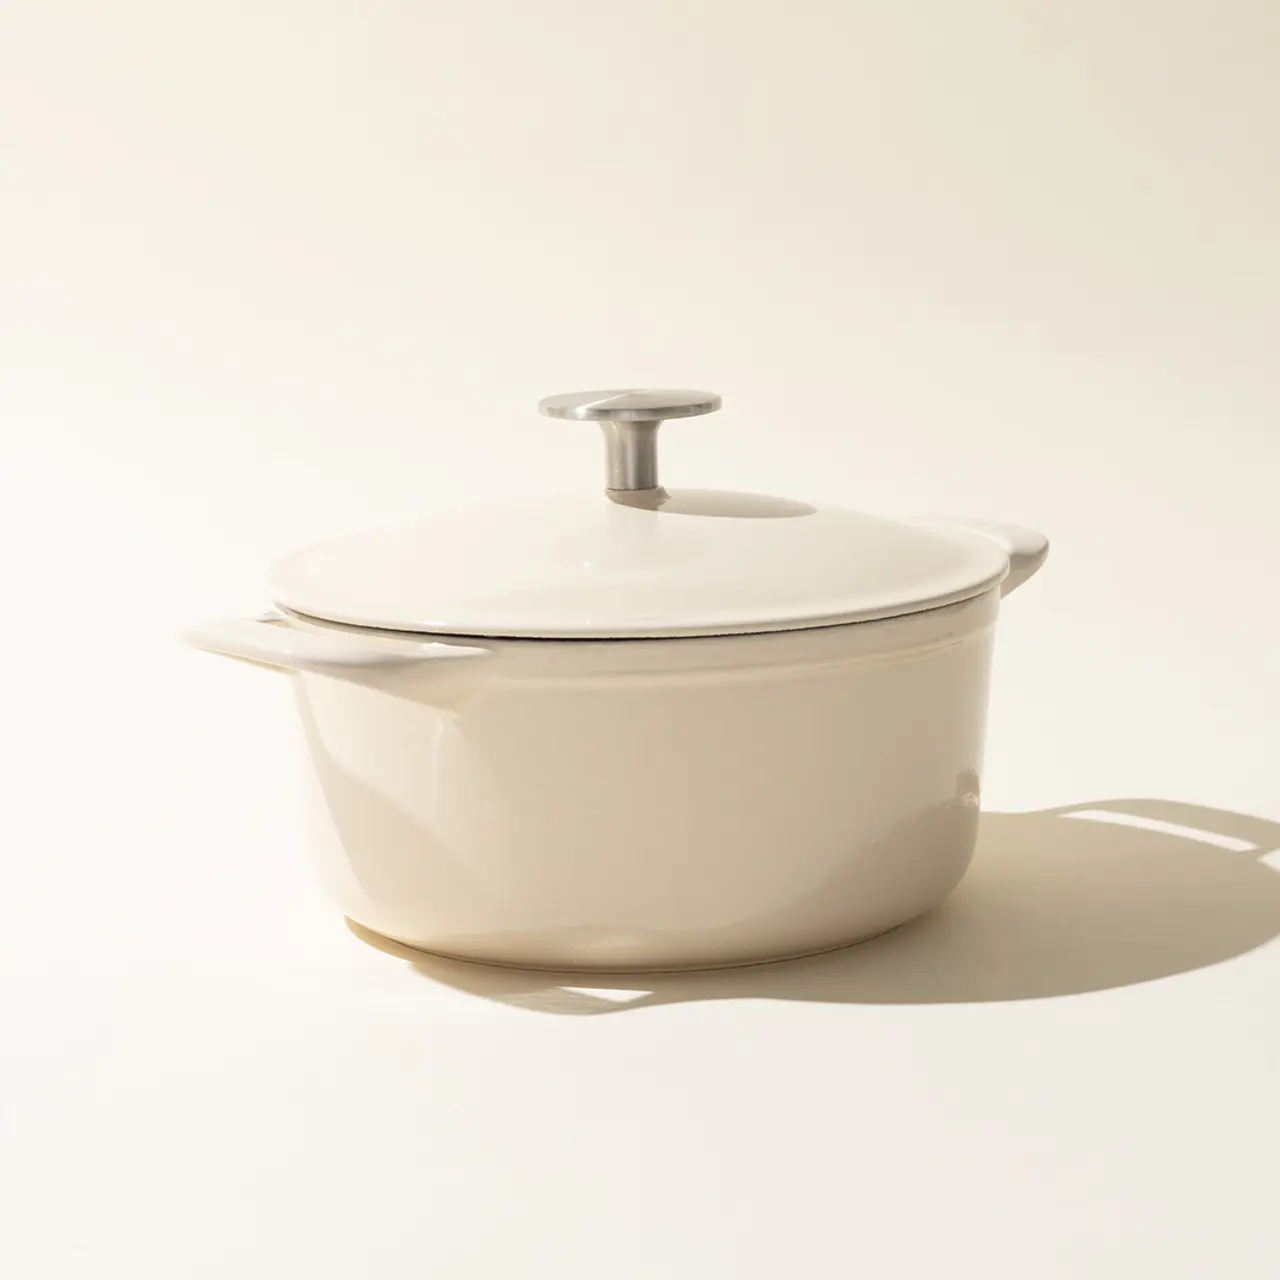 A minimalist image featuring a antique white-colored saucepan with a lid against a light background, casting a soft shadow to the right.